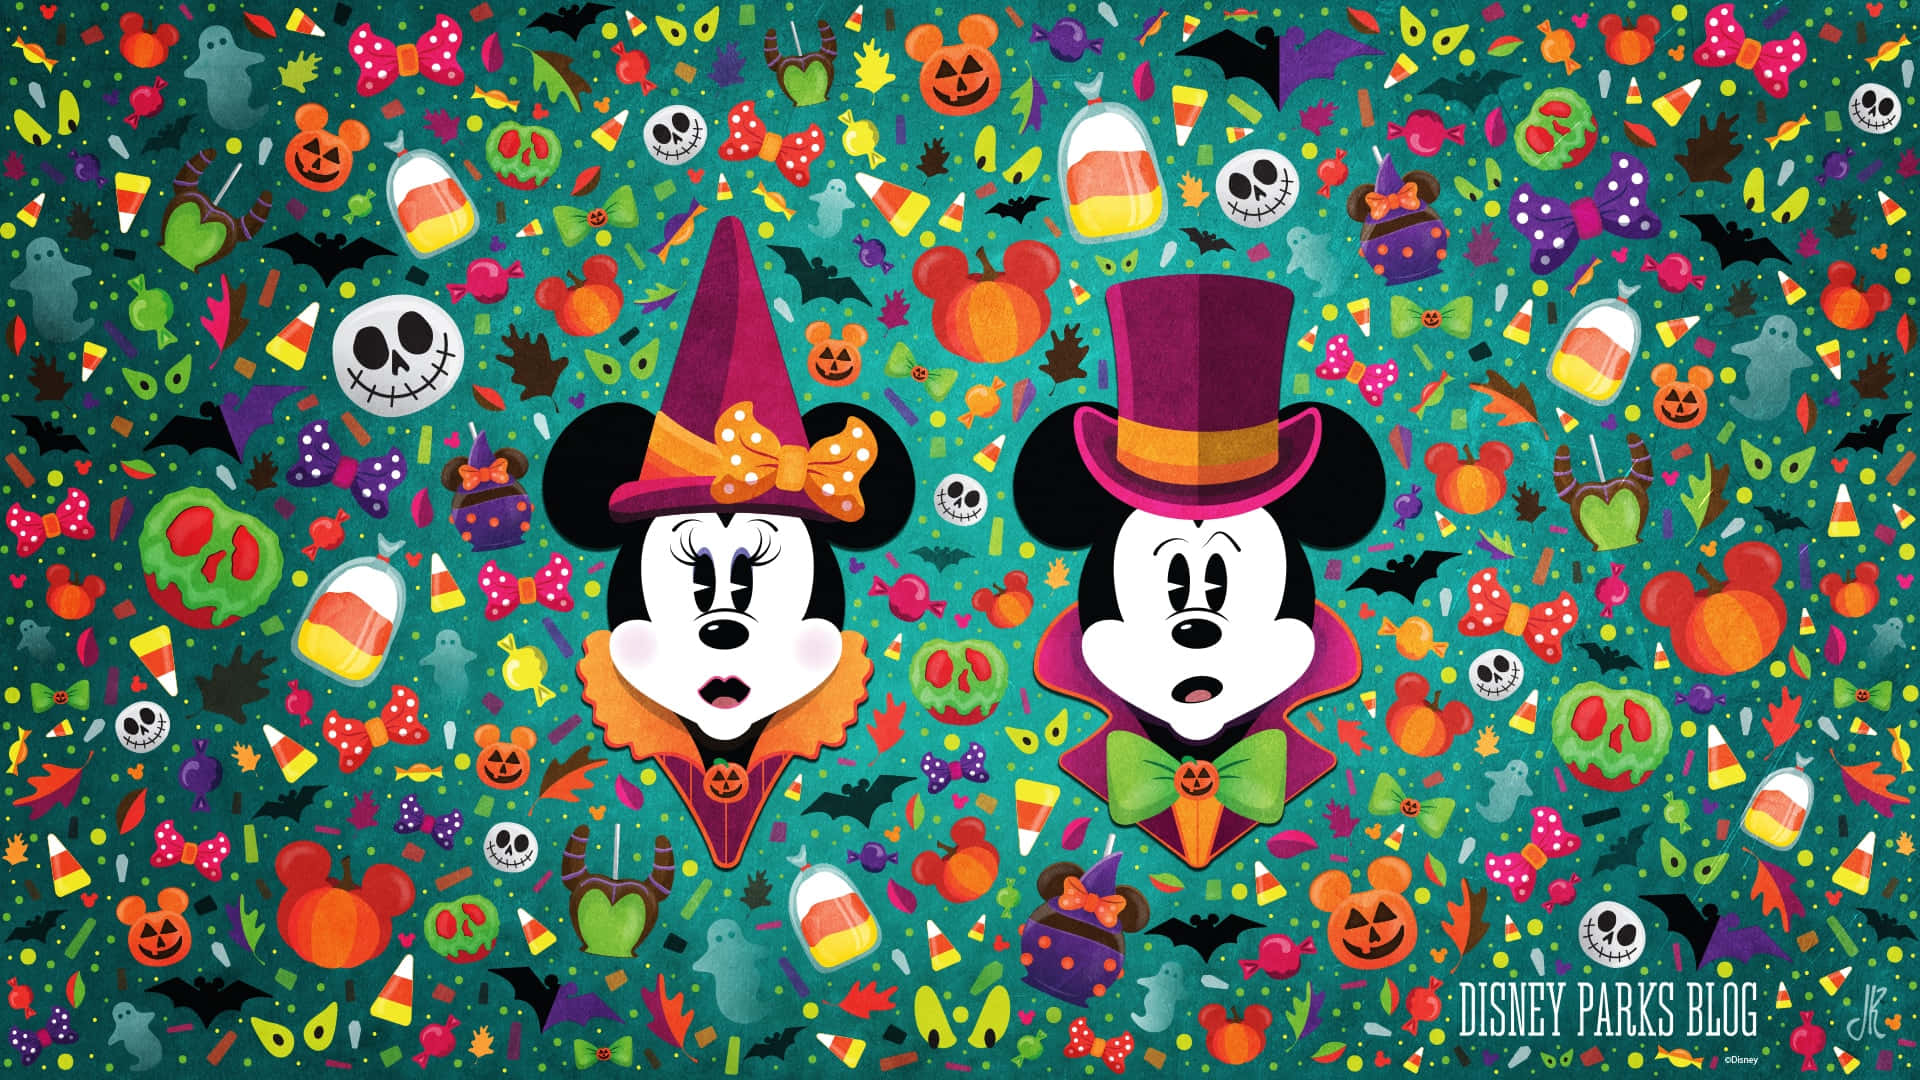 Get Ready For Some Girly Fun This Halloween! Wallpaper